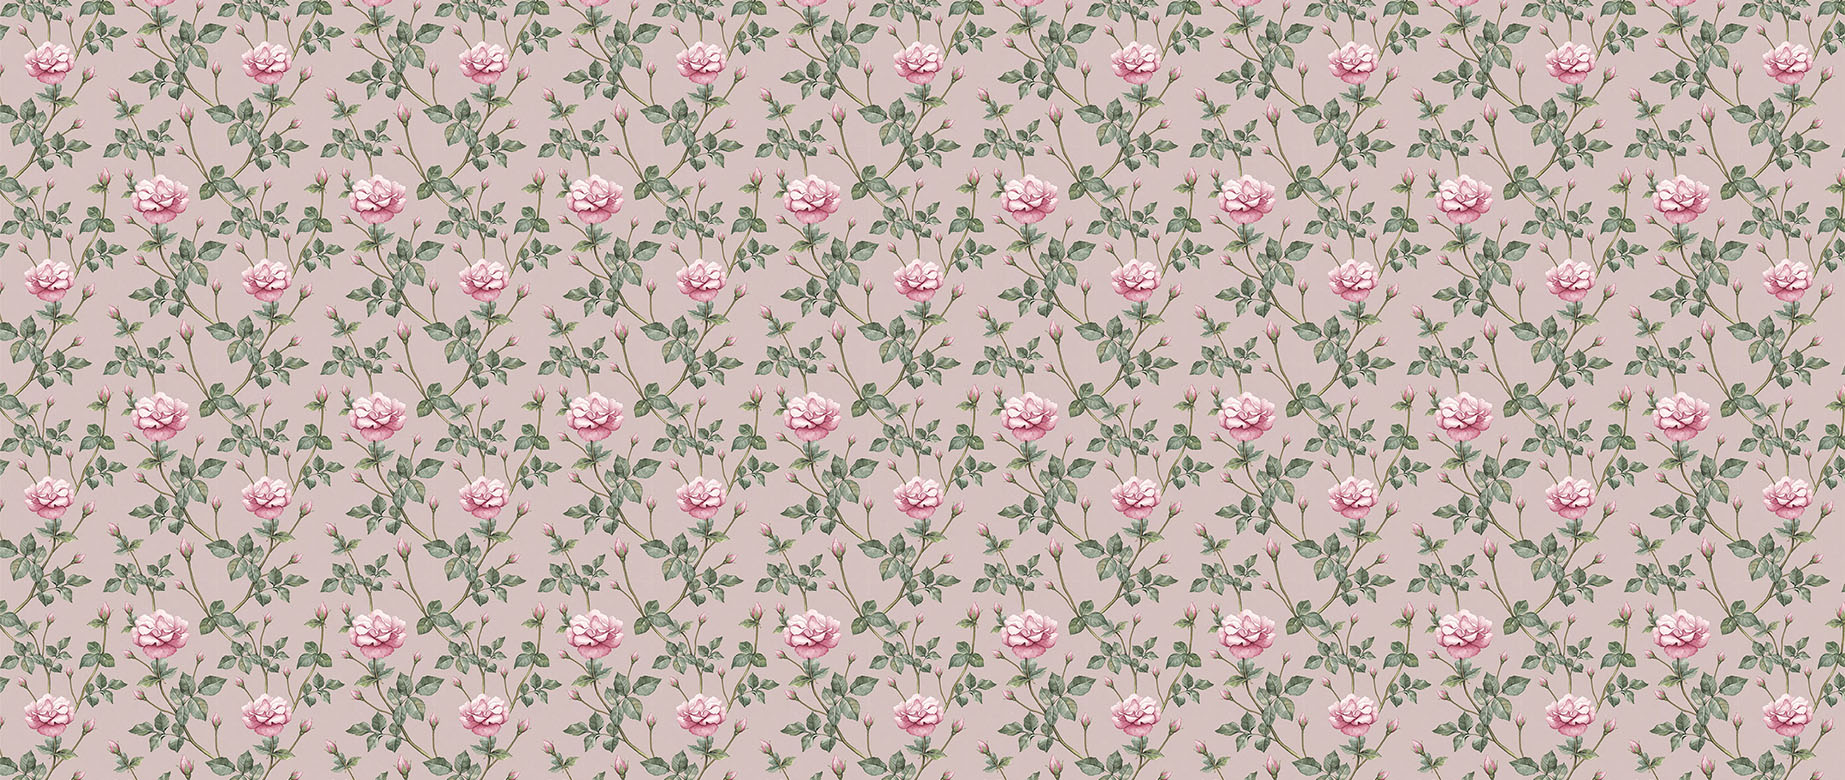 pink-rose-with-green-leaf-wallpaper-wide-view